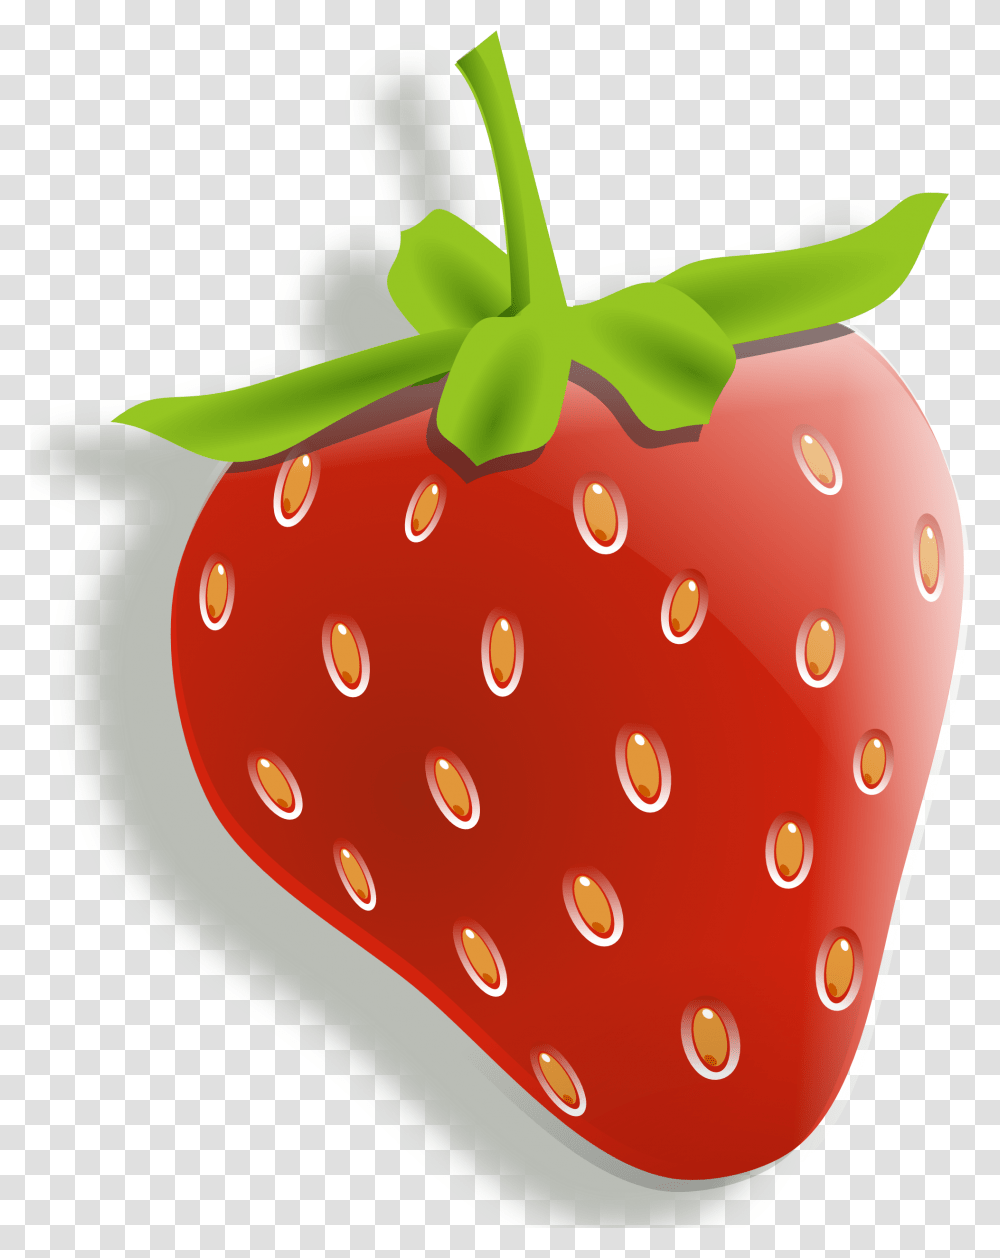 Strawberry Images Strawberries Background, Fruit, Plant, Food, Birthday Cake Transparent Png